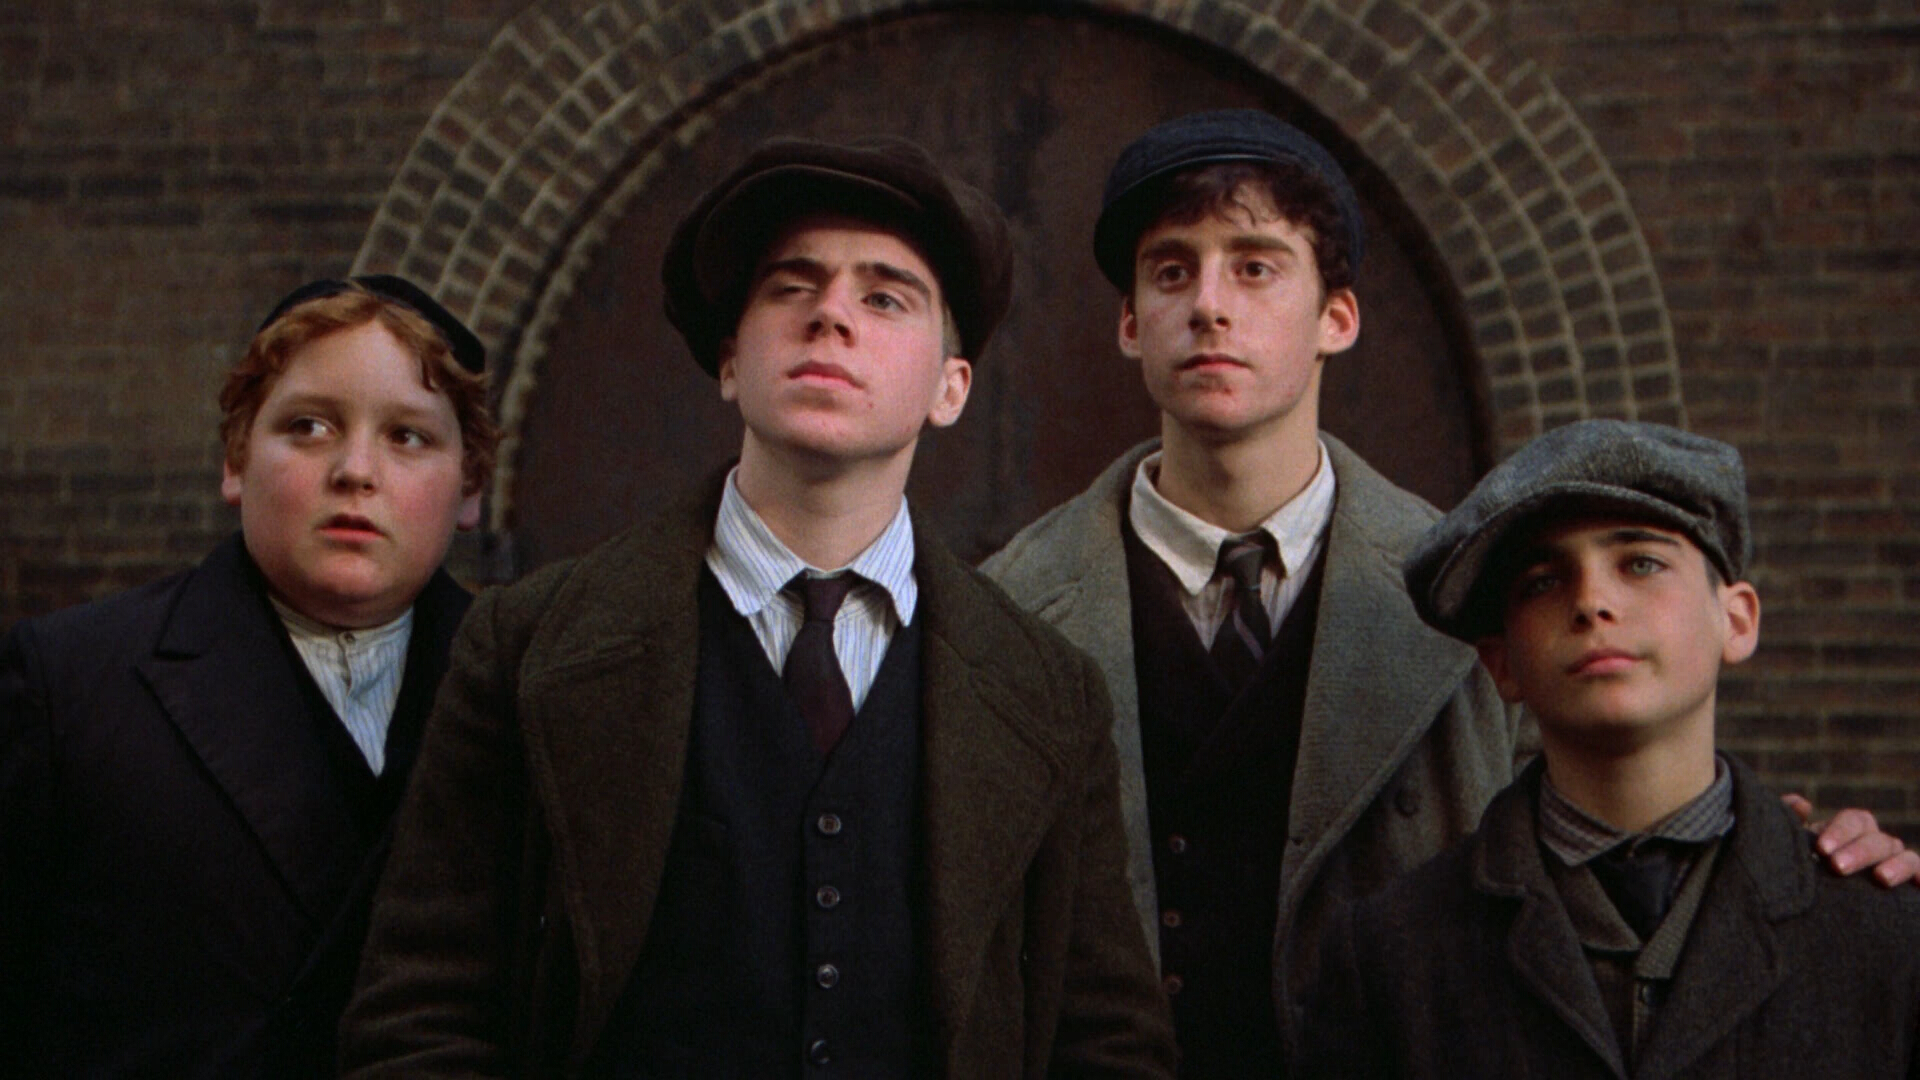 ROBERT DENIRO ONCE UPON A TIME IN AMERICA A3 GZ928